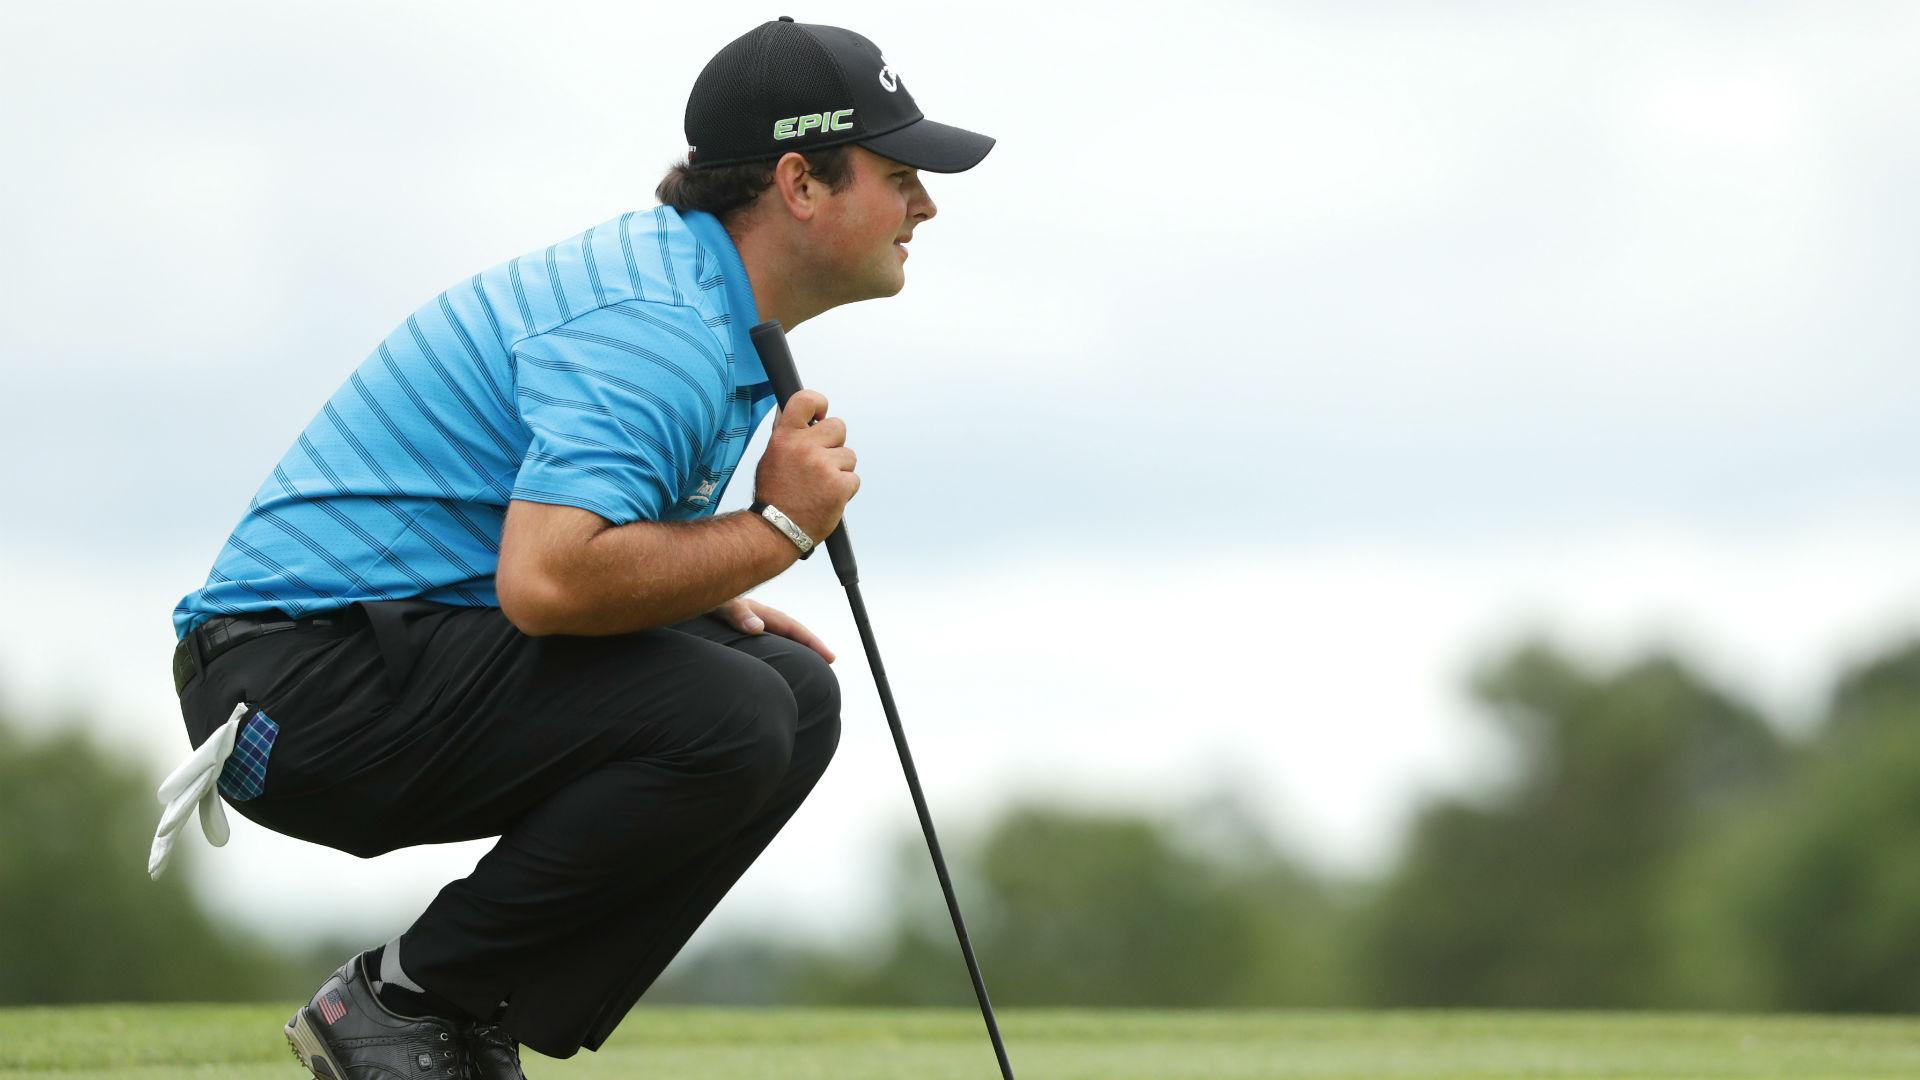 Wells Fargo Championship: A look ahead to Sunday with Patrick Reed